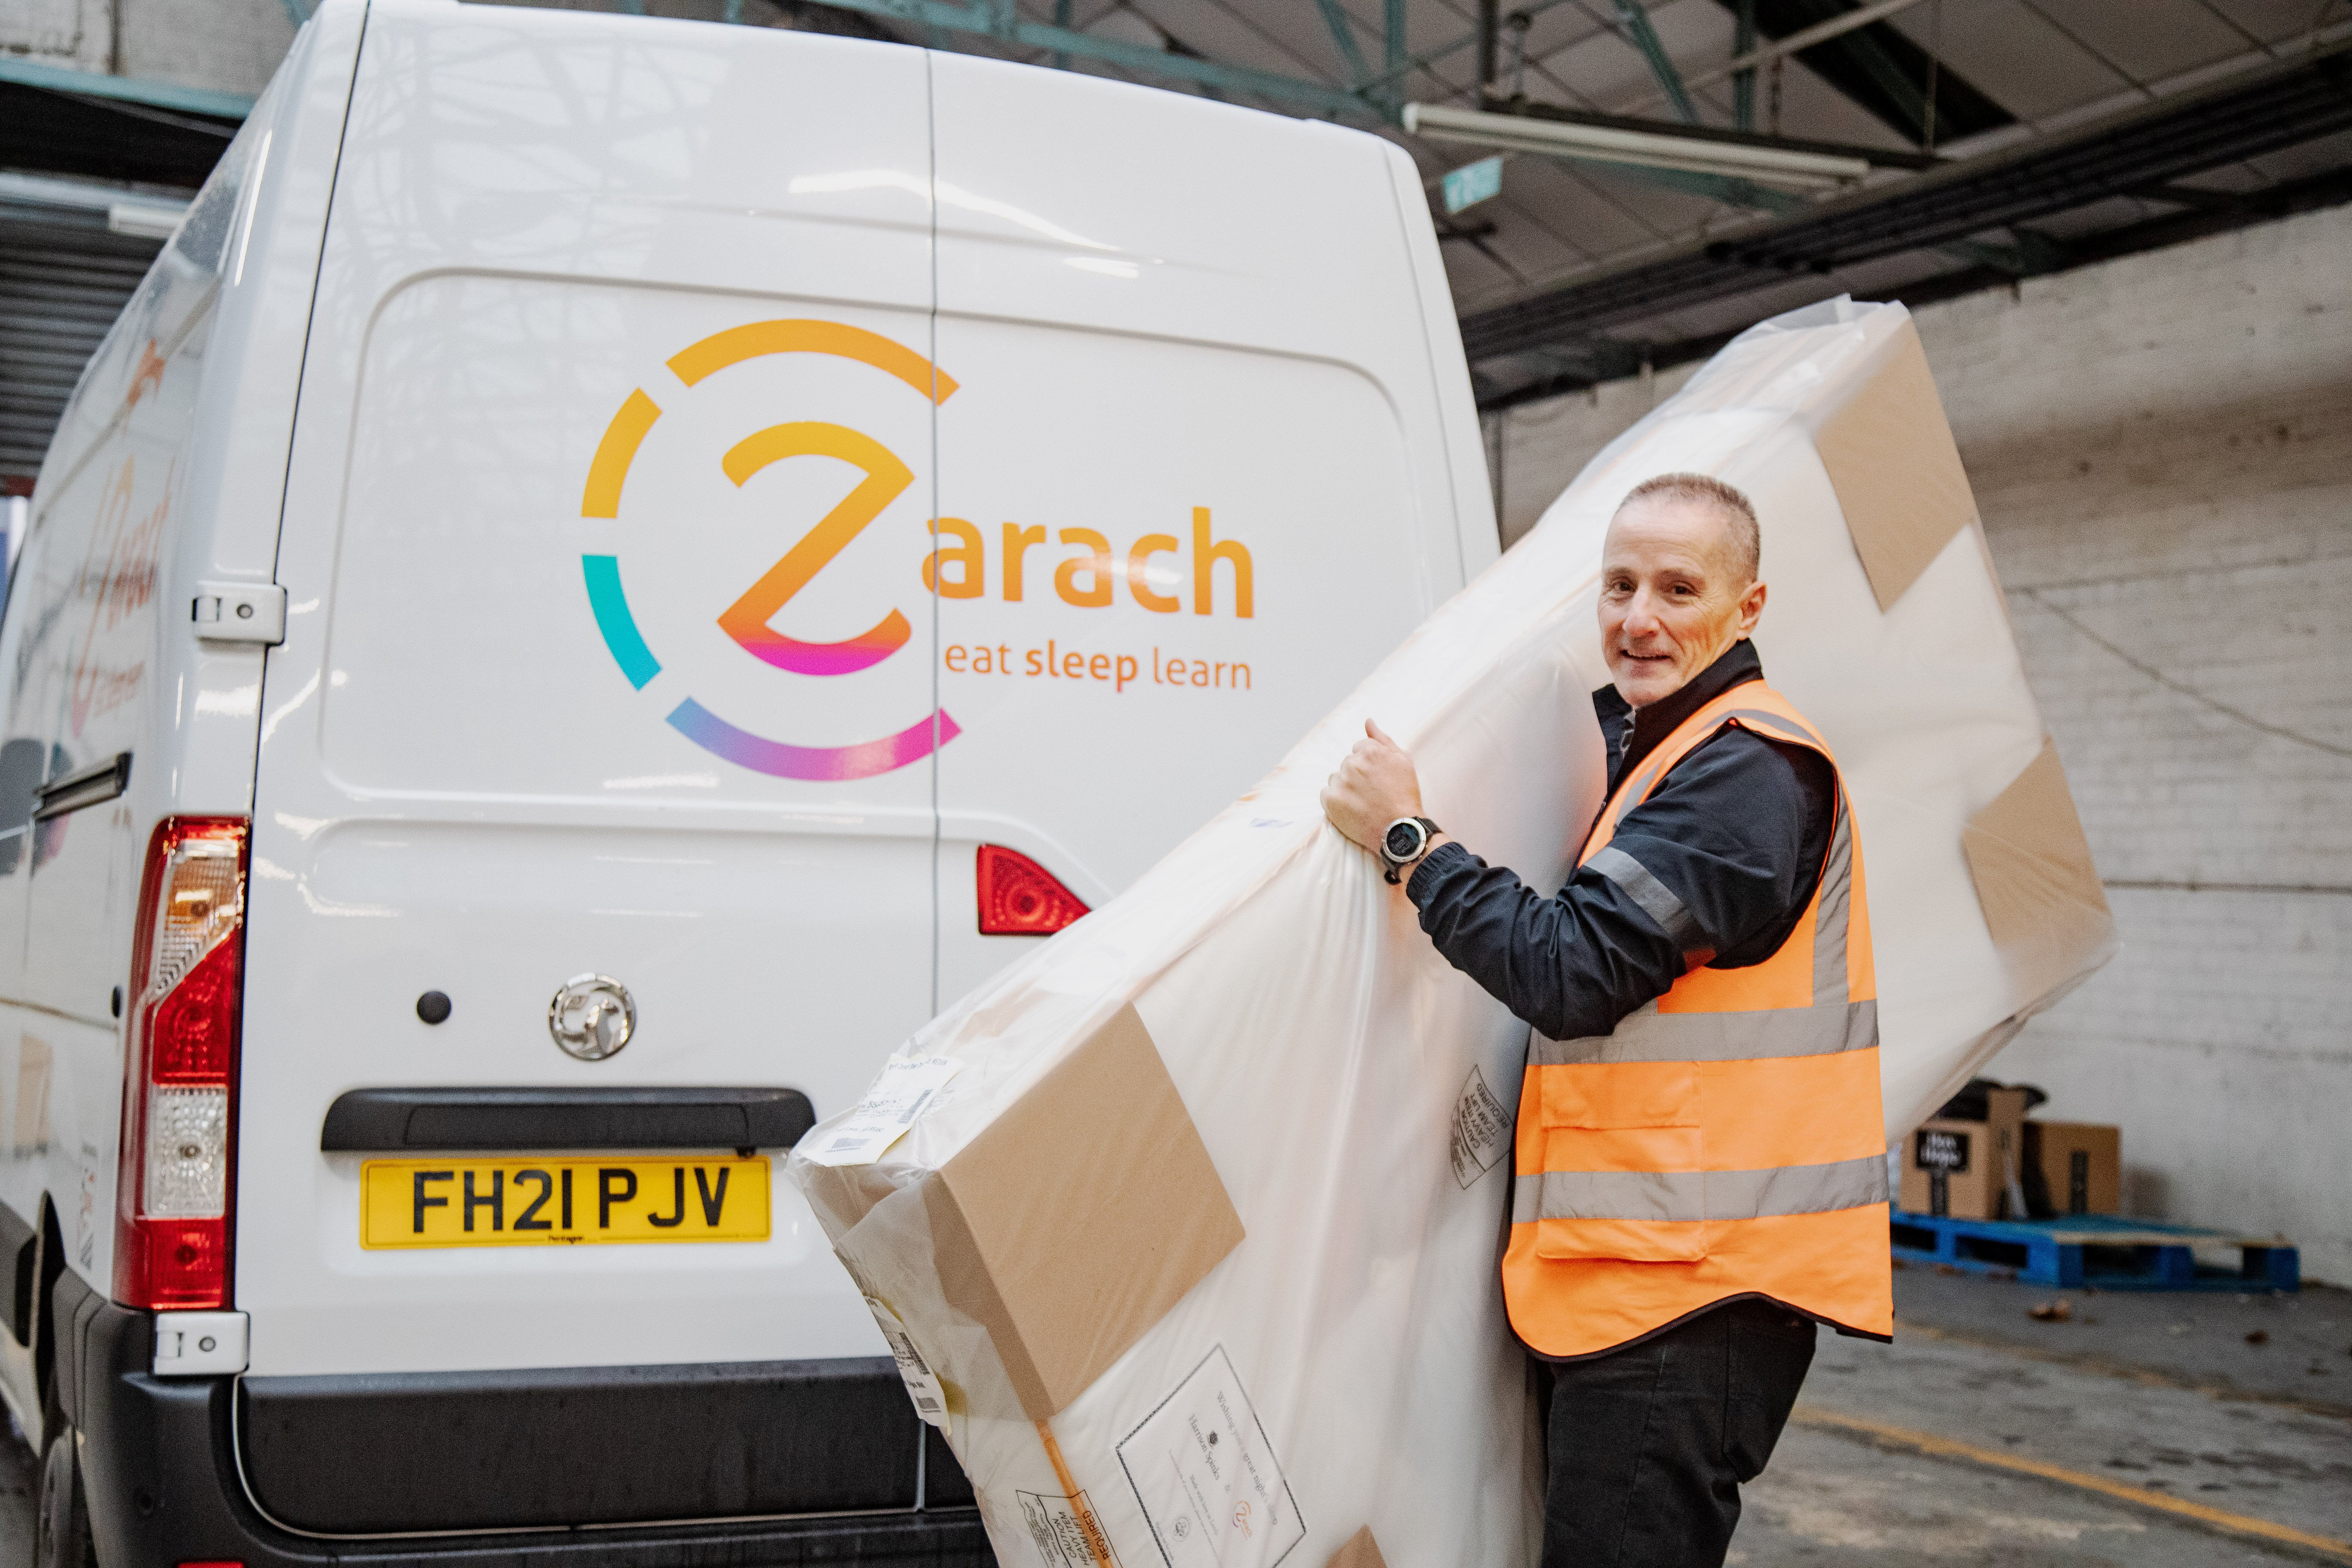 Volunteers deliver beds after schools refer a family to Zarach for support